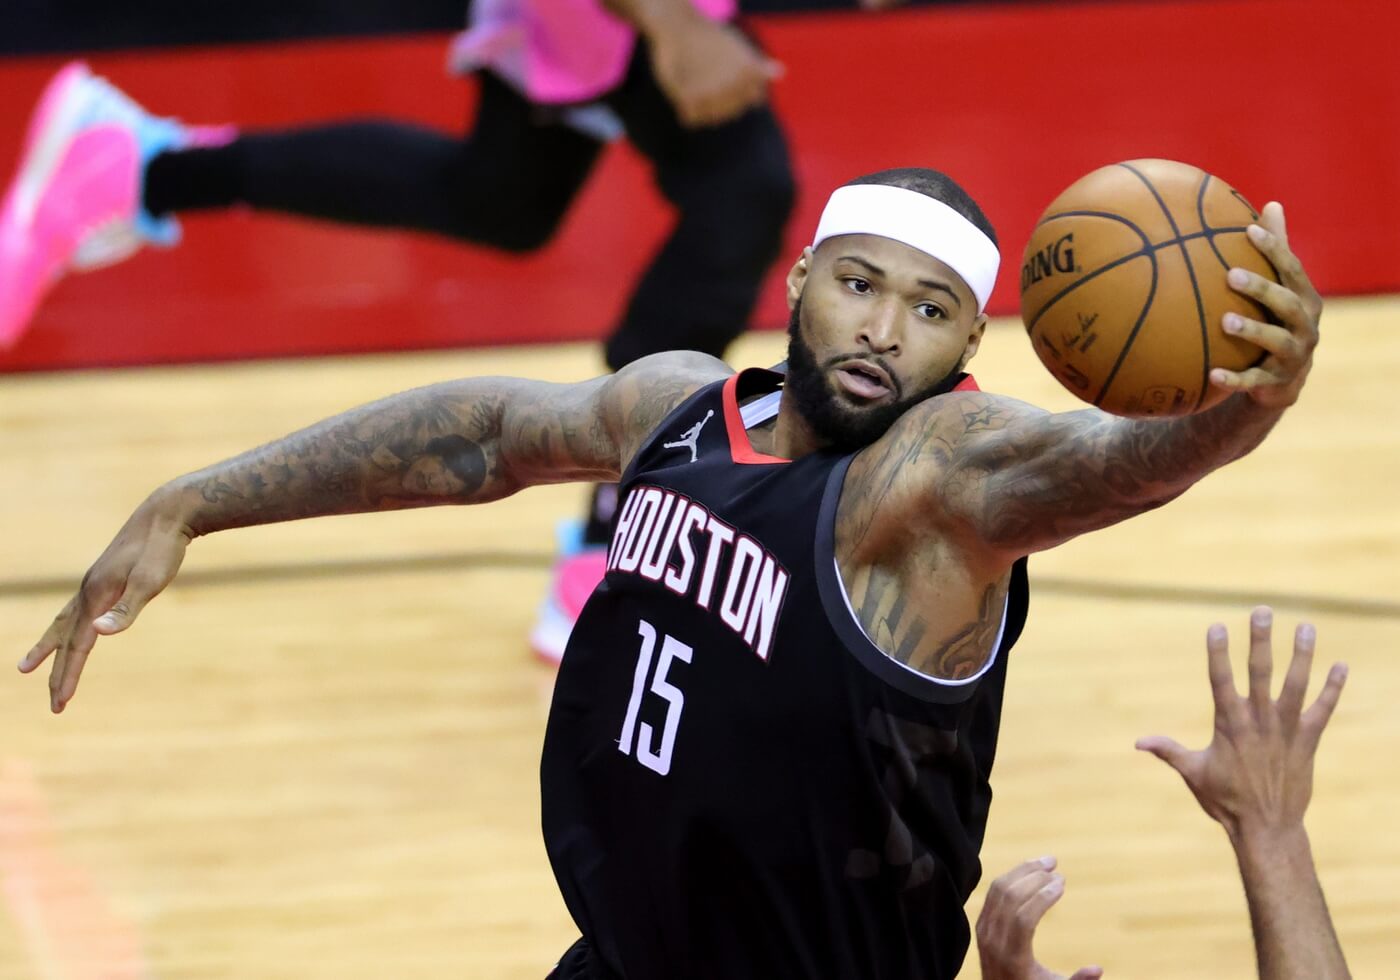 Houston Rockets center DeMarcus Cousins (15) reaches for a rebound during the second quarter against the Miami Heat at Toyota Center.